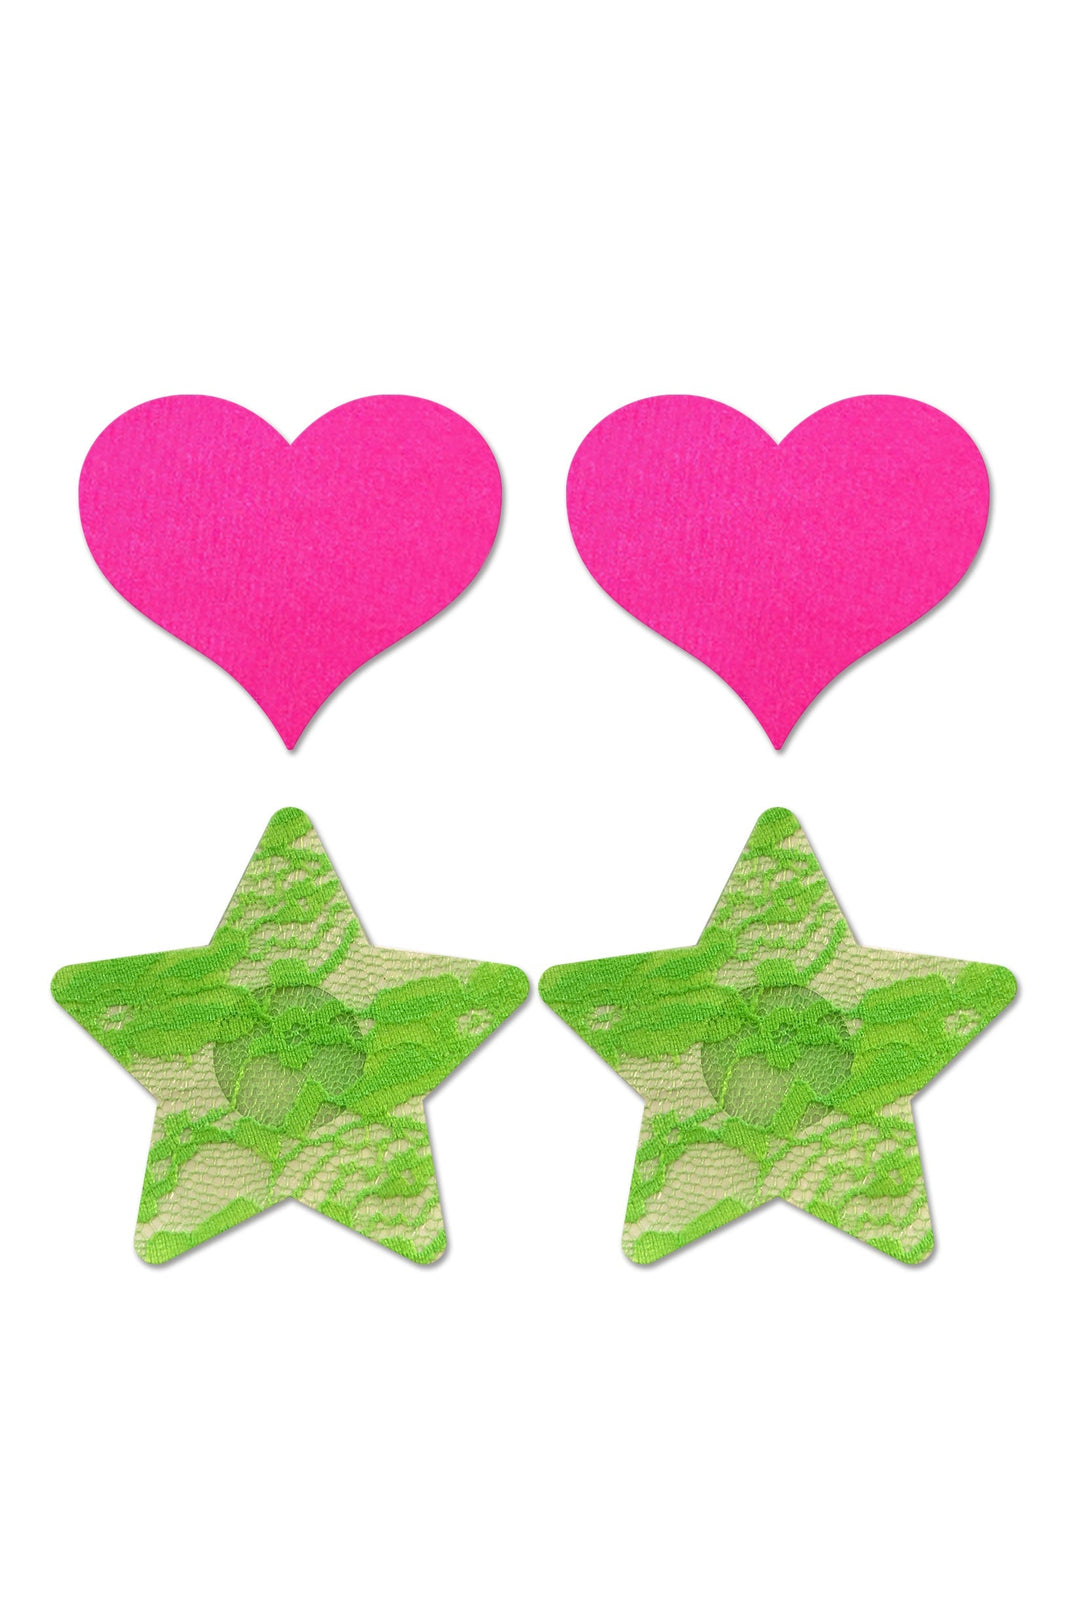 UV Reactive Neon Heart & Lace Star Pasties Pink & Green Pack of 2-Fantasy Lingerie-Rebel Romance